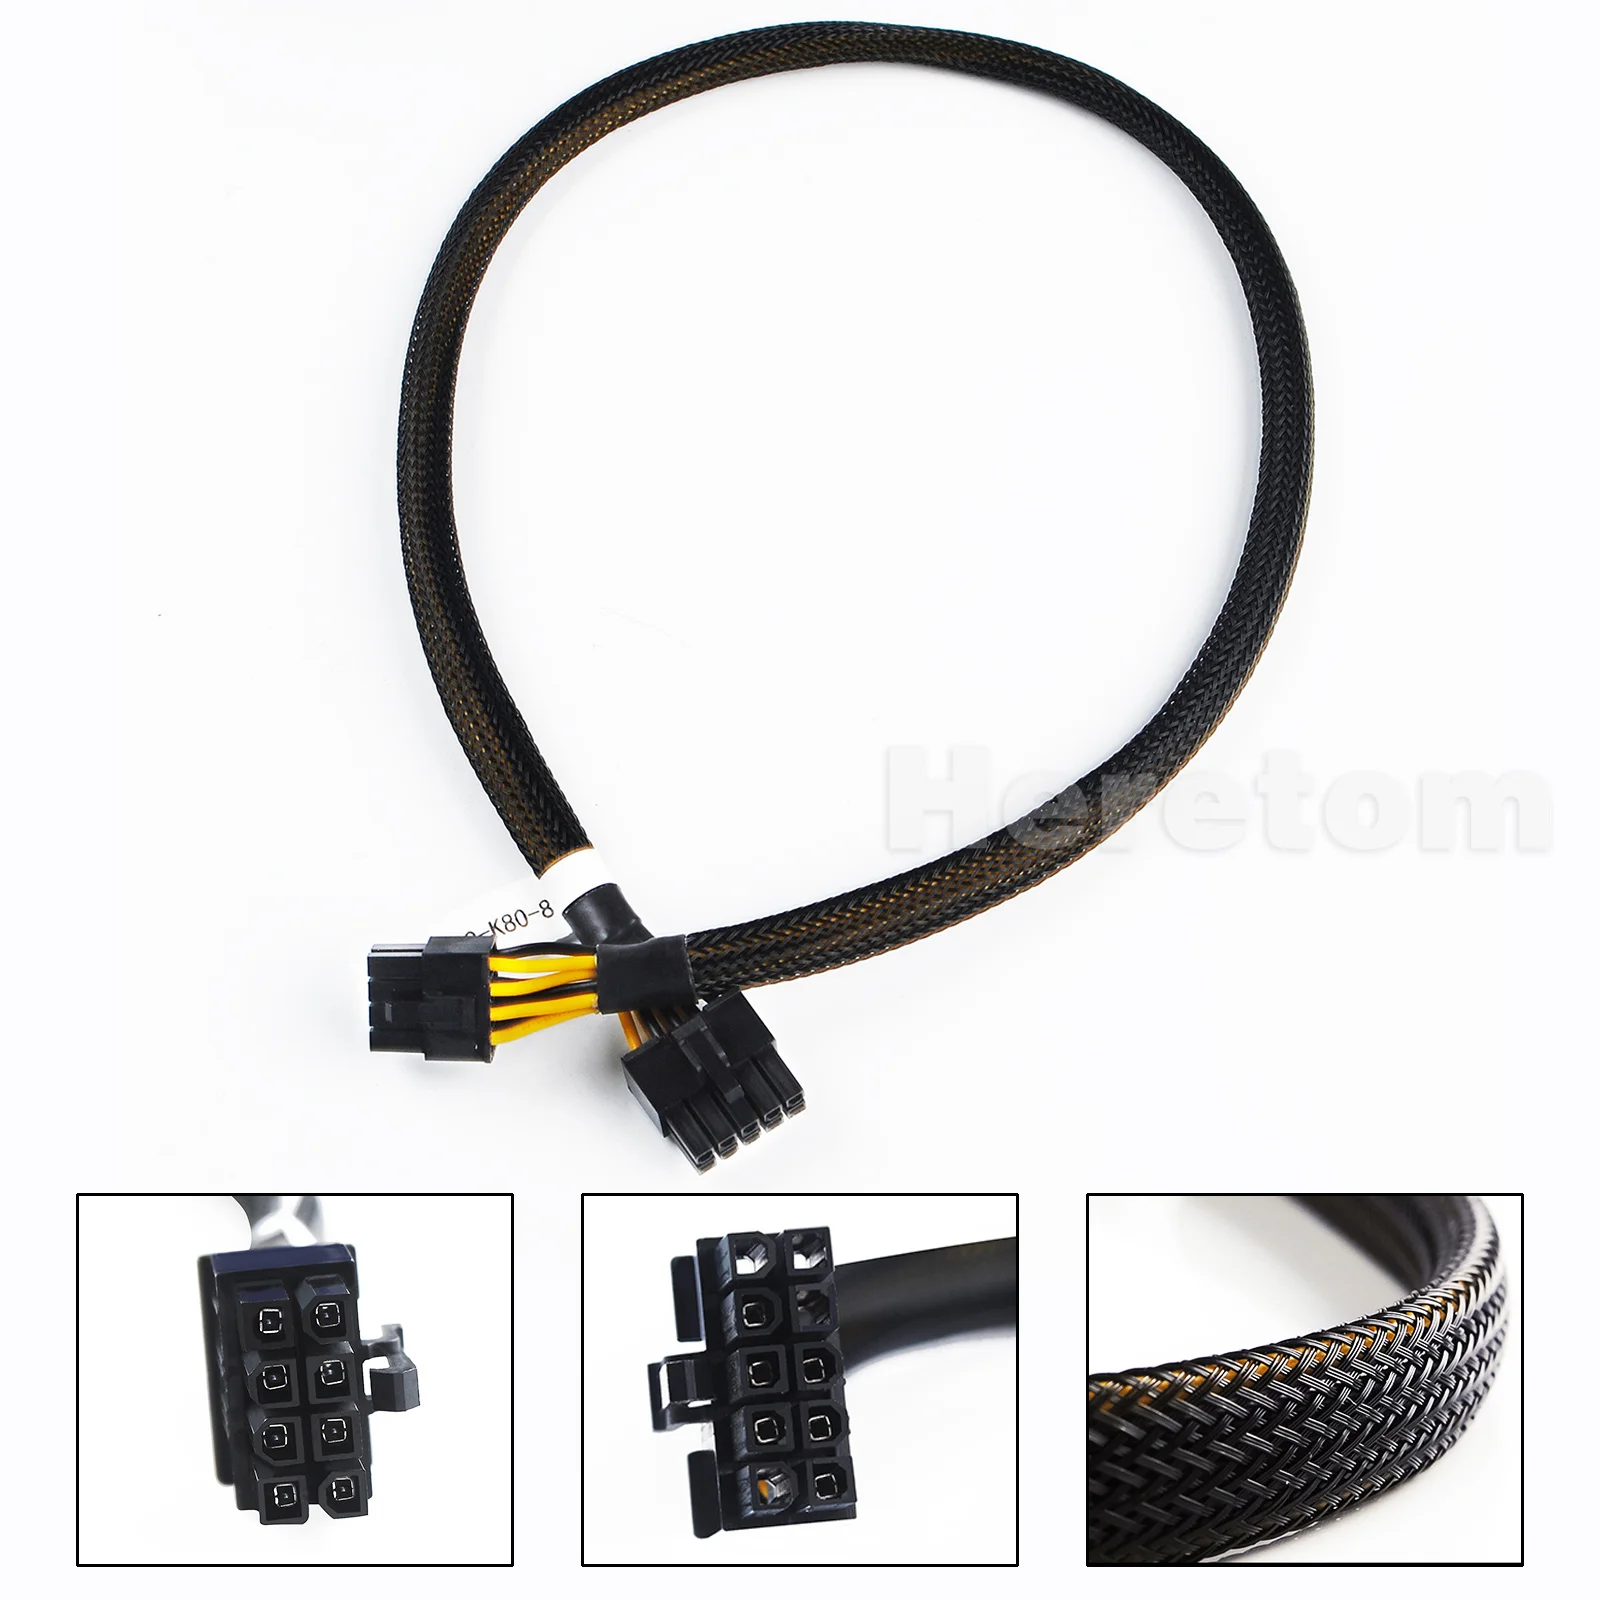 

10-pin to 8-pin PCIE GPU Power Adapter Cable for HP DL380 G8 Gen 8 Nvidia K80/M40/M60/P40/P100